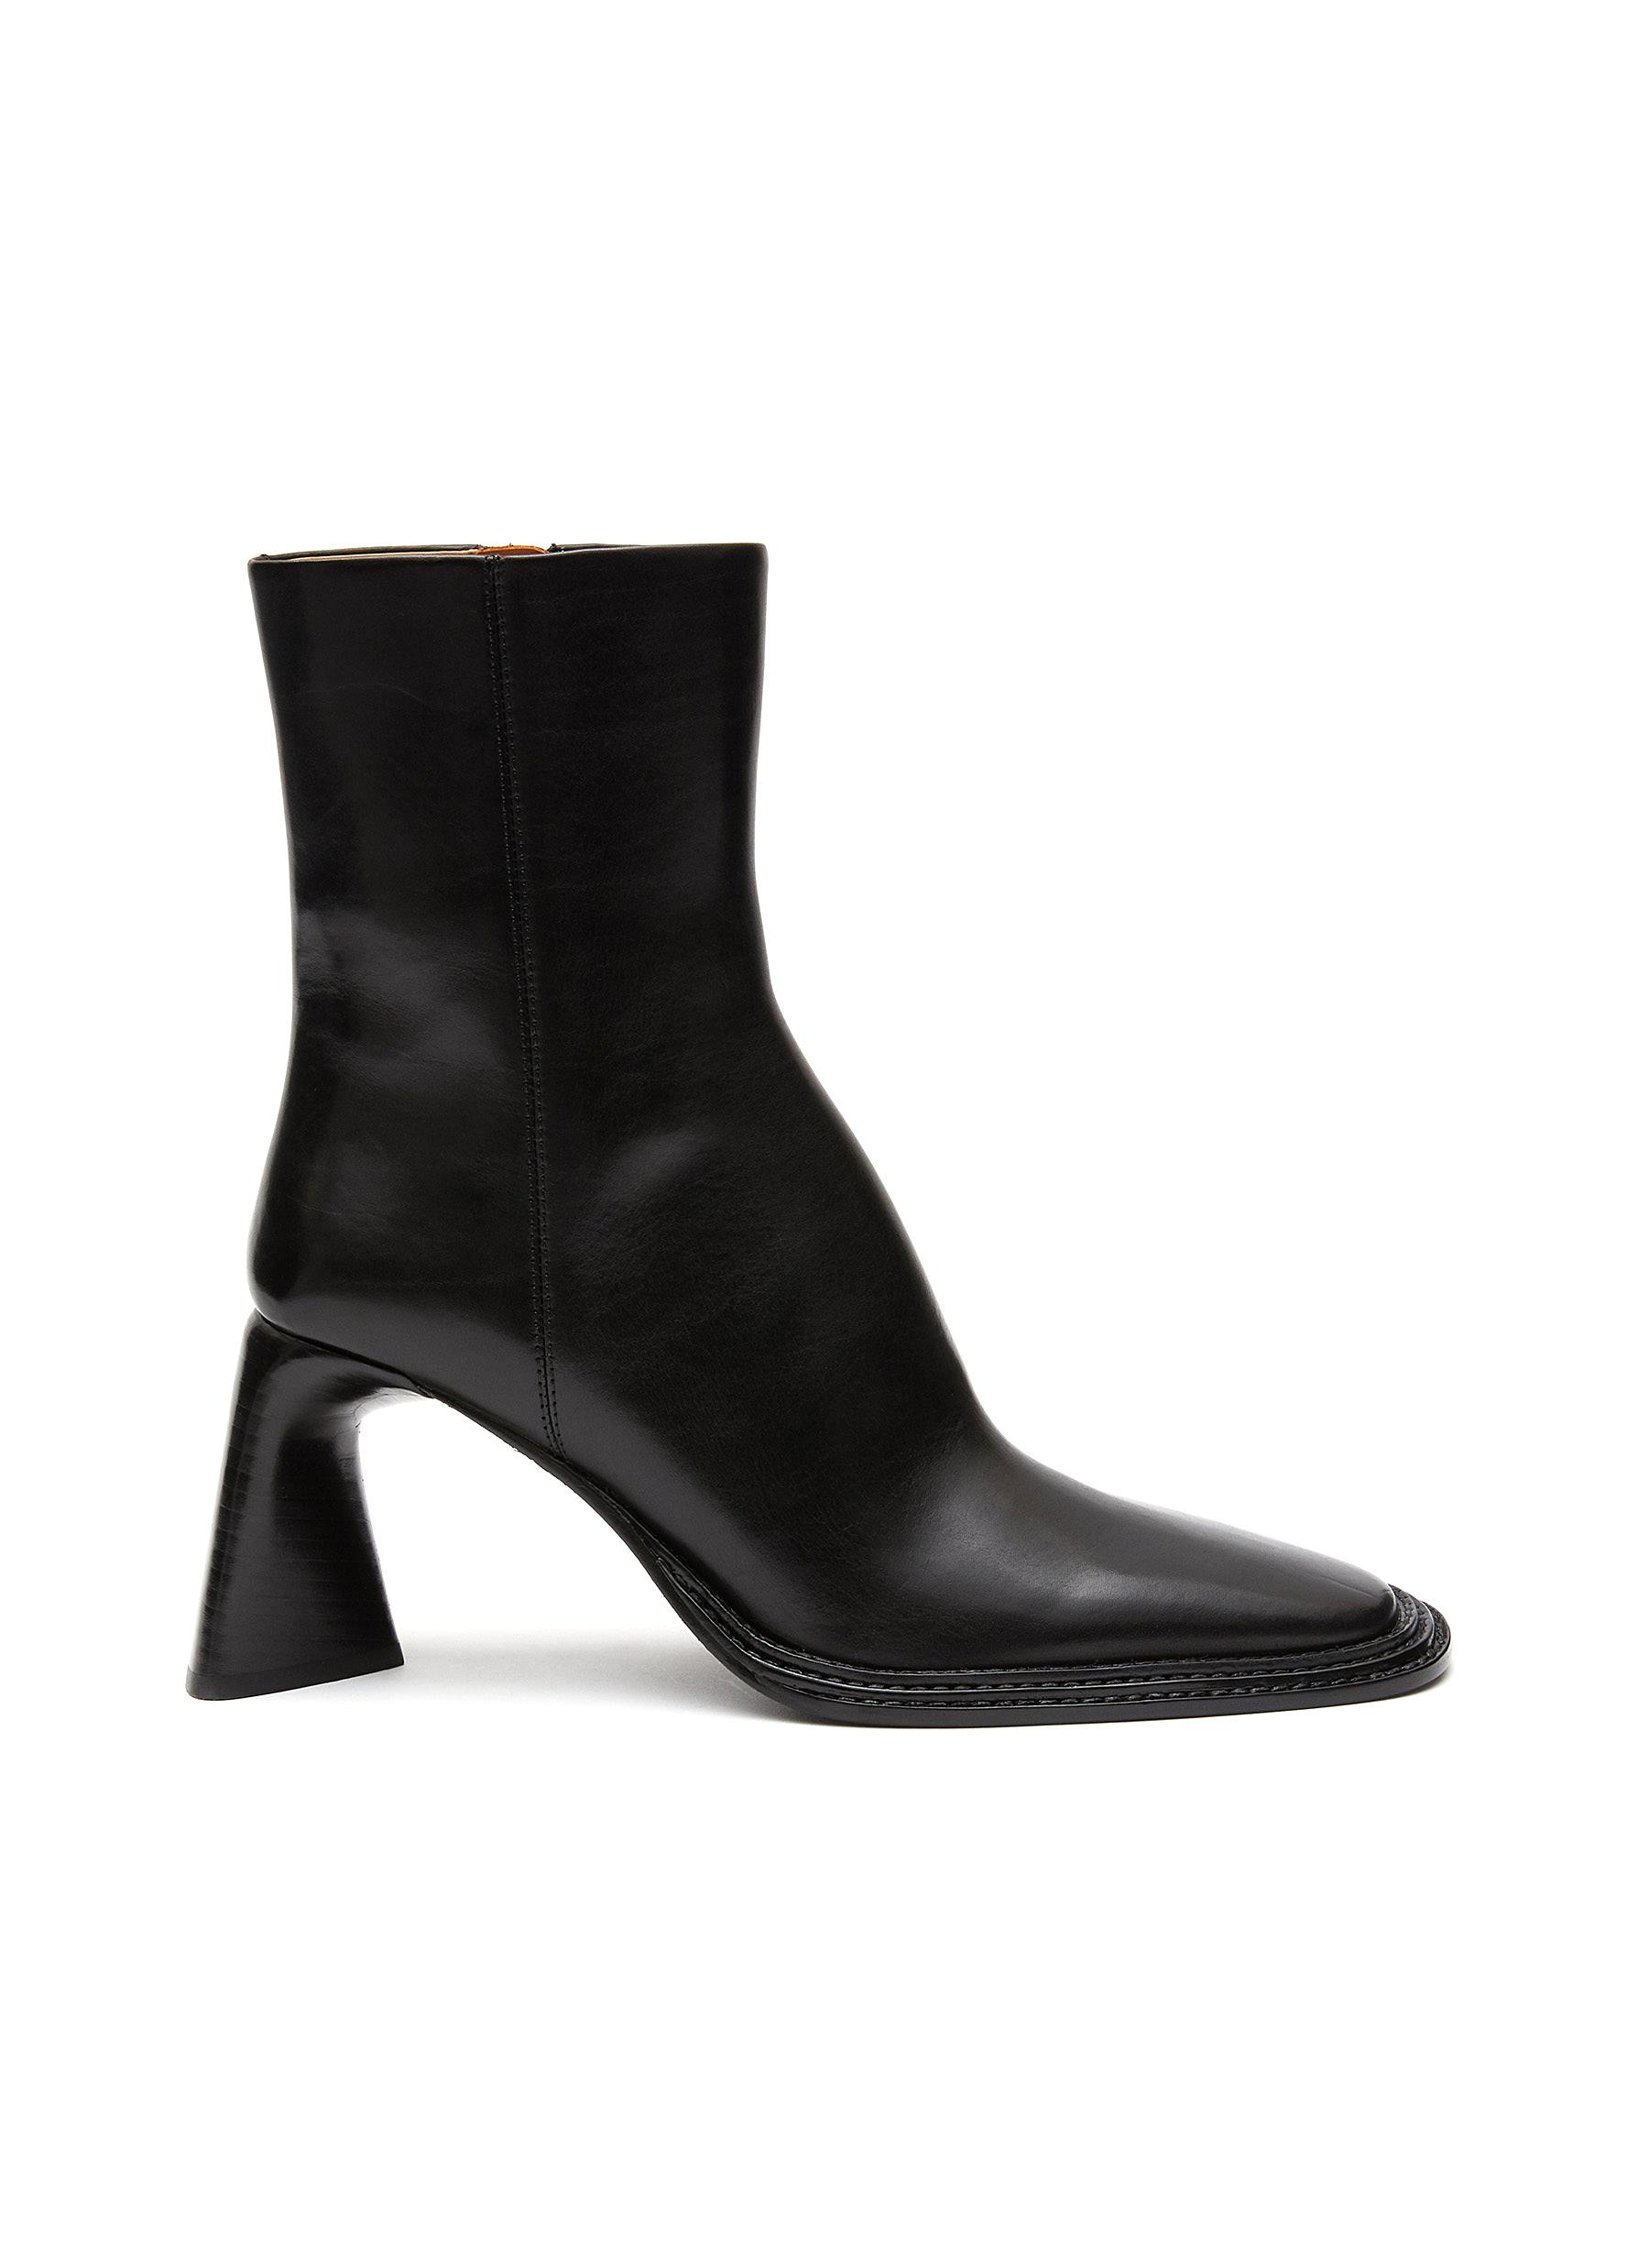 ALEXANDER WANG 'BOOKER' SQUARE TOE LEATHER ANKLE BOOTS